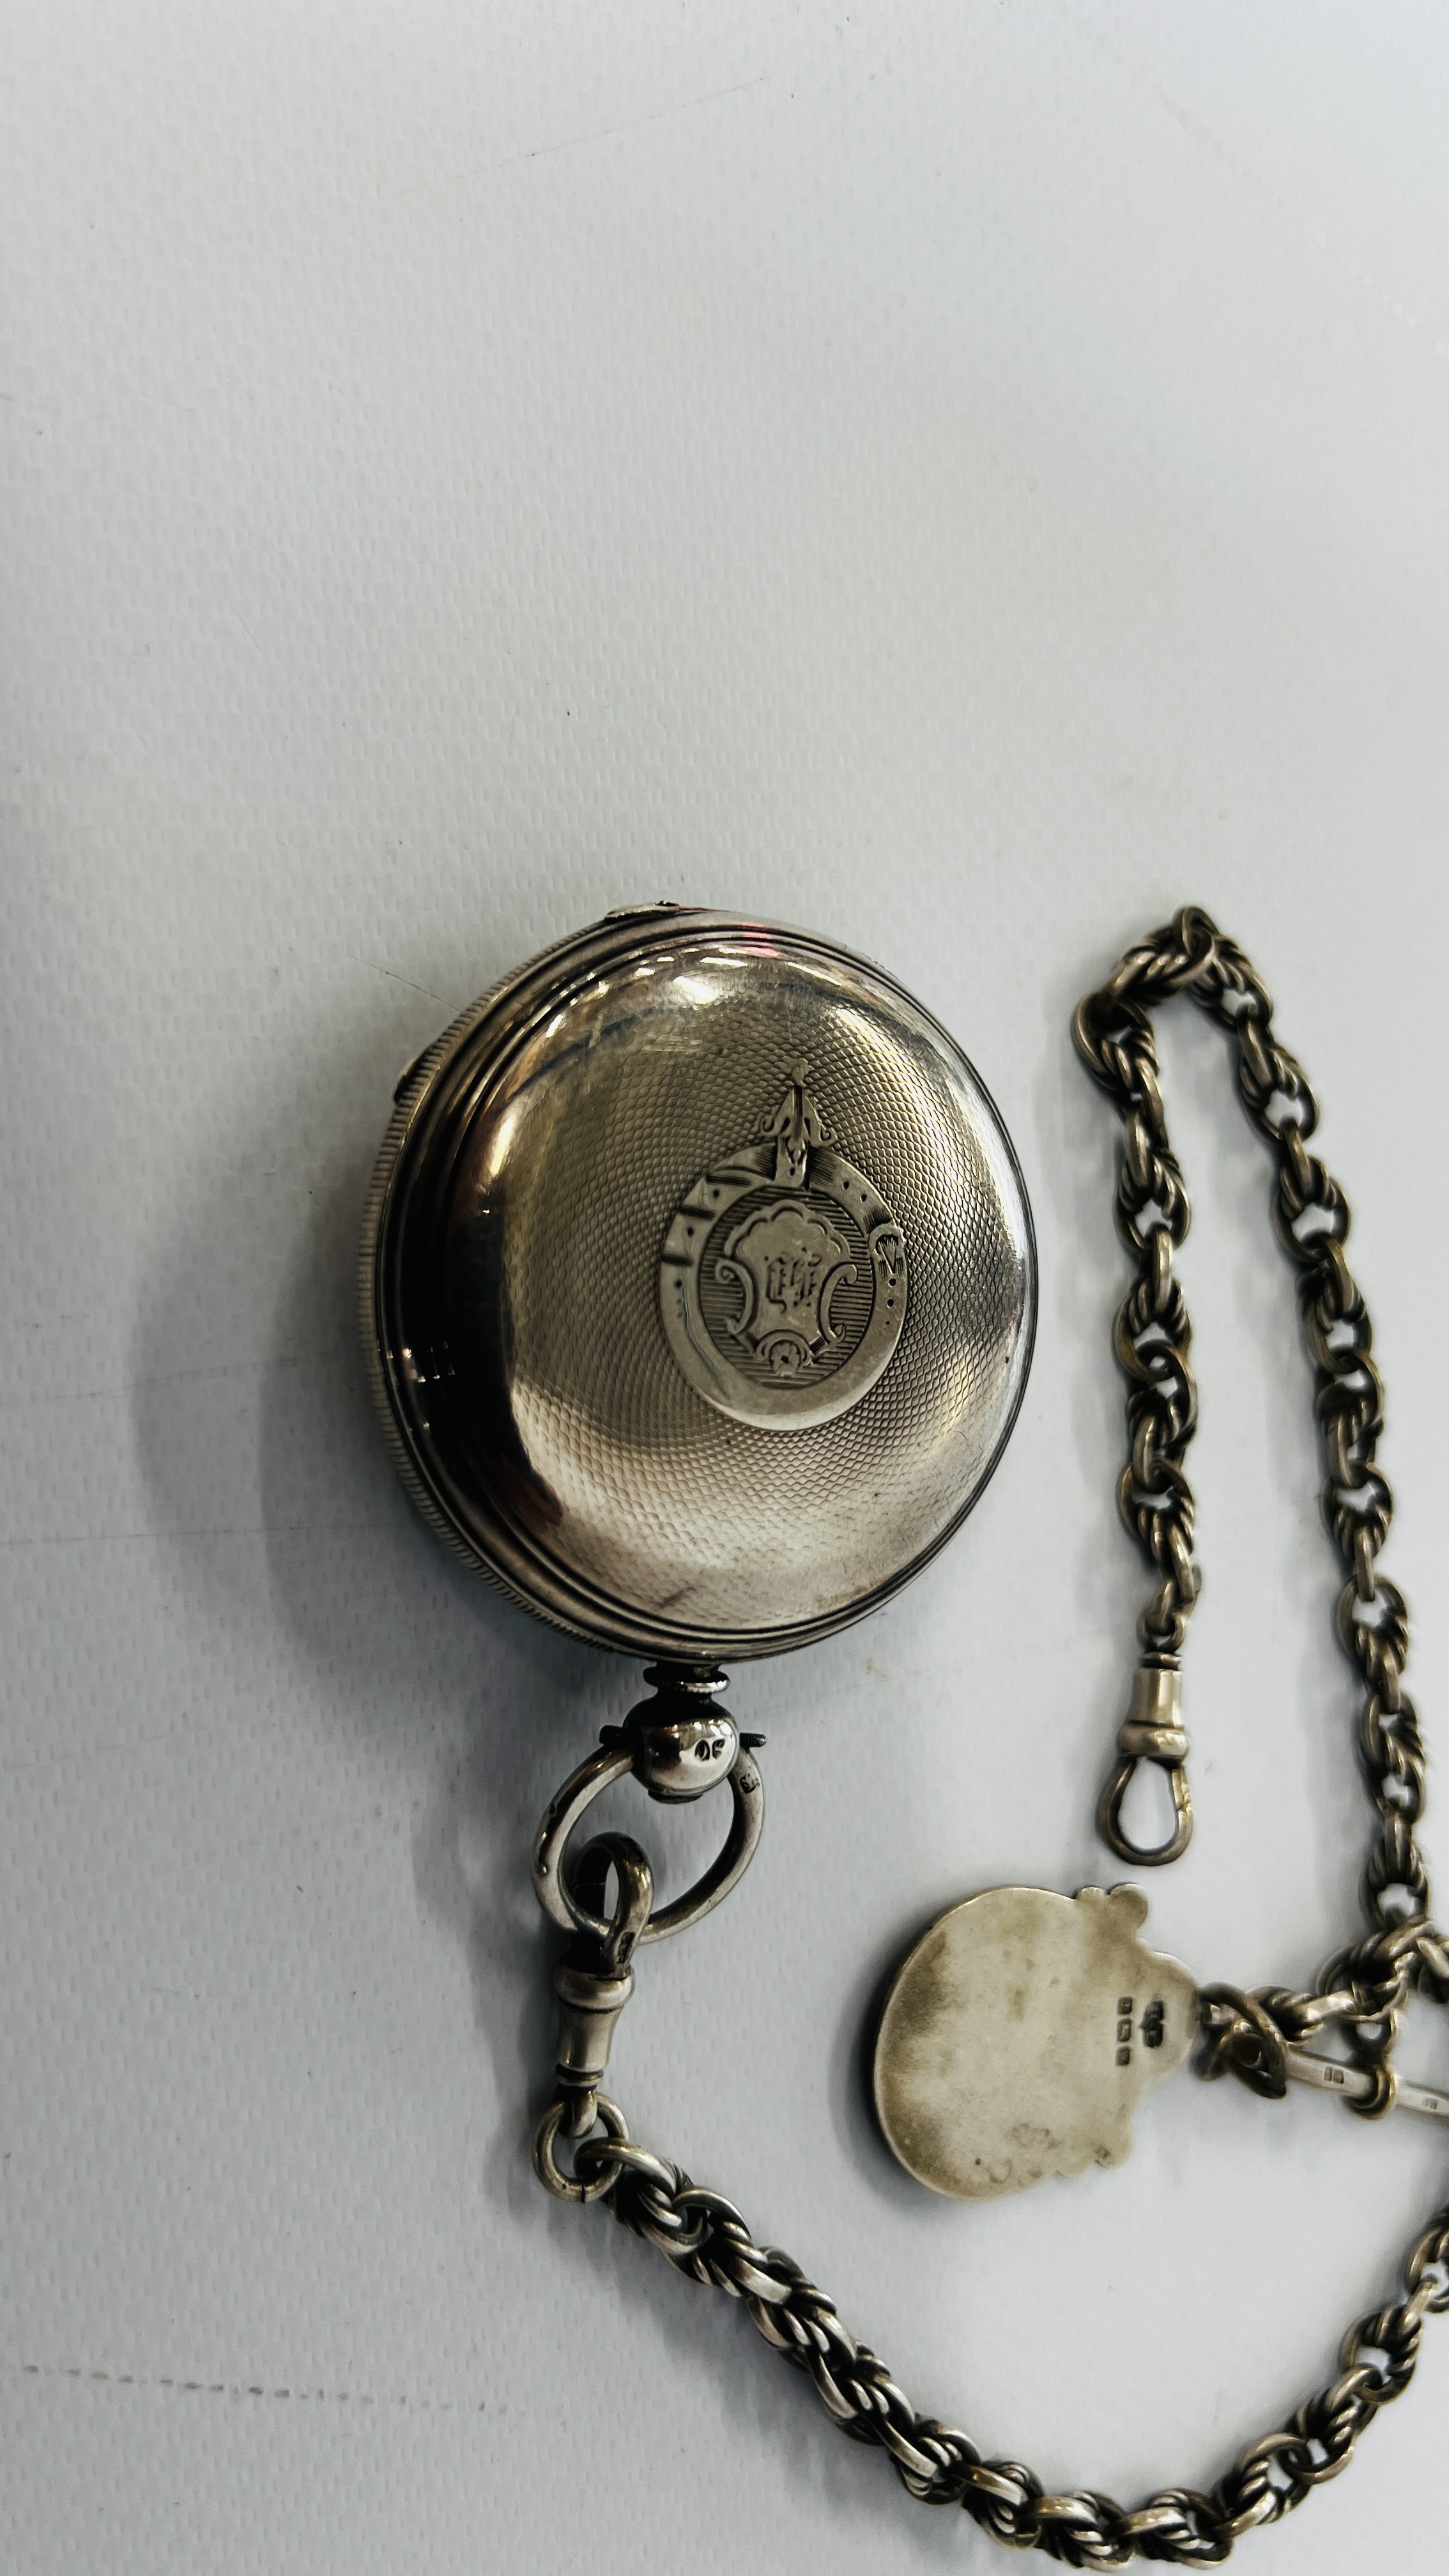 AN ANTIQUE SILVER POCKET WATCH, THE ENAMELED DIAL MARKED J.B. - Image 8 of 13